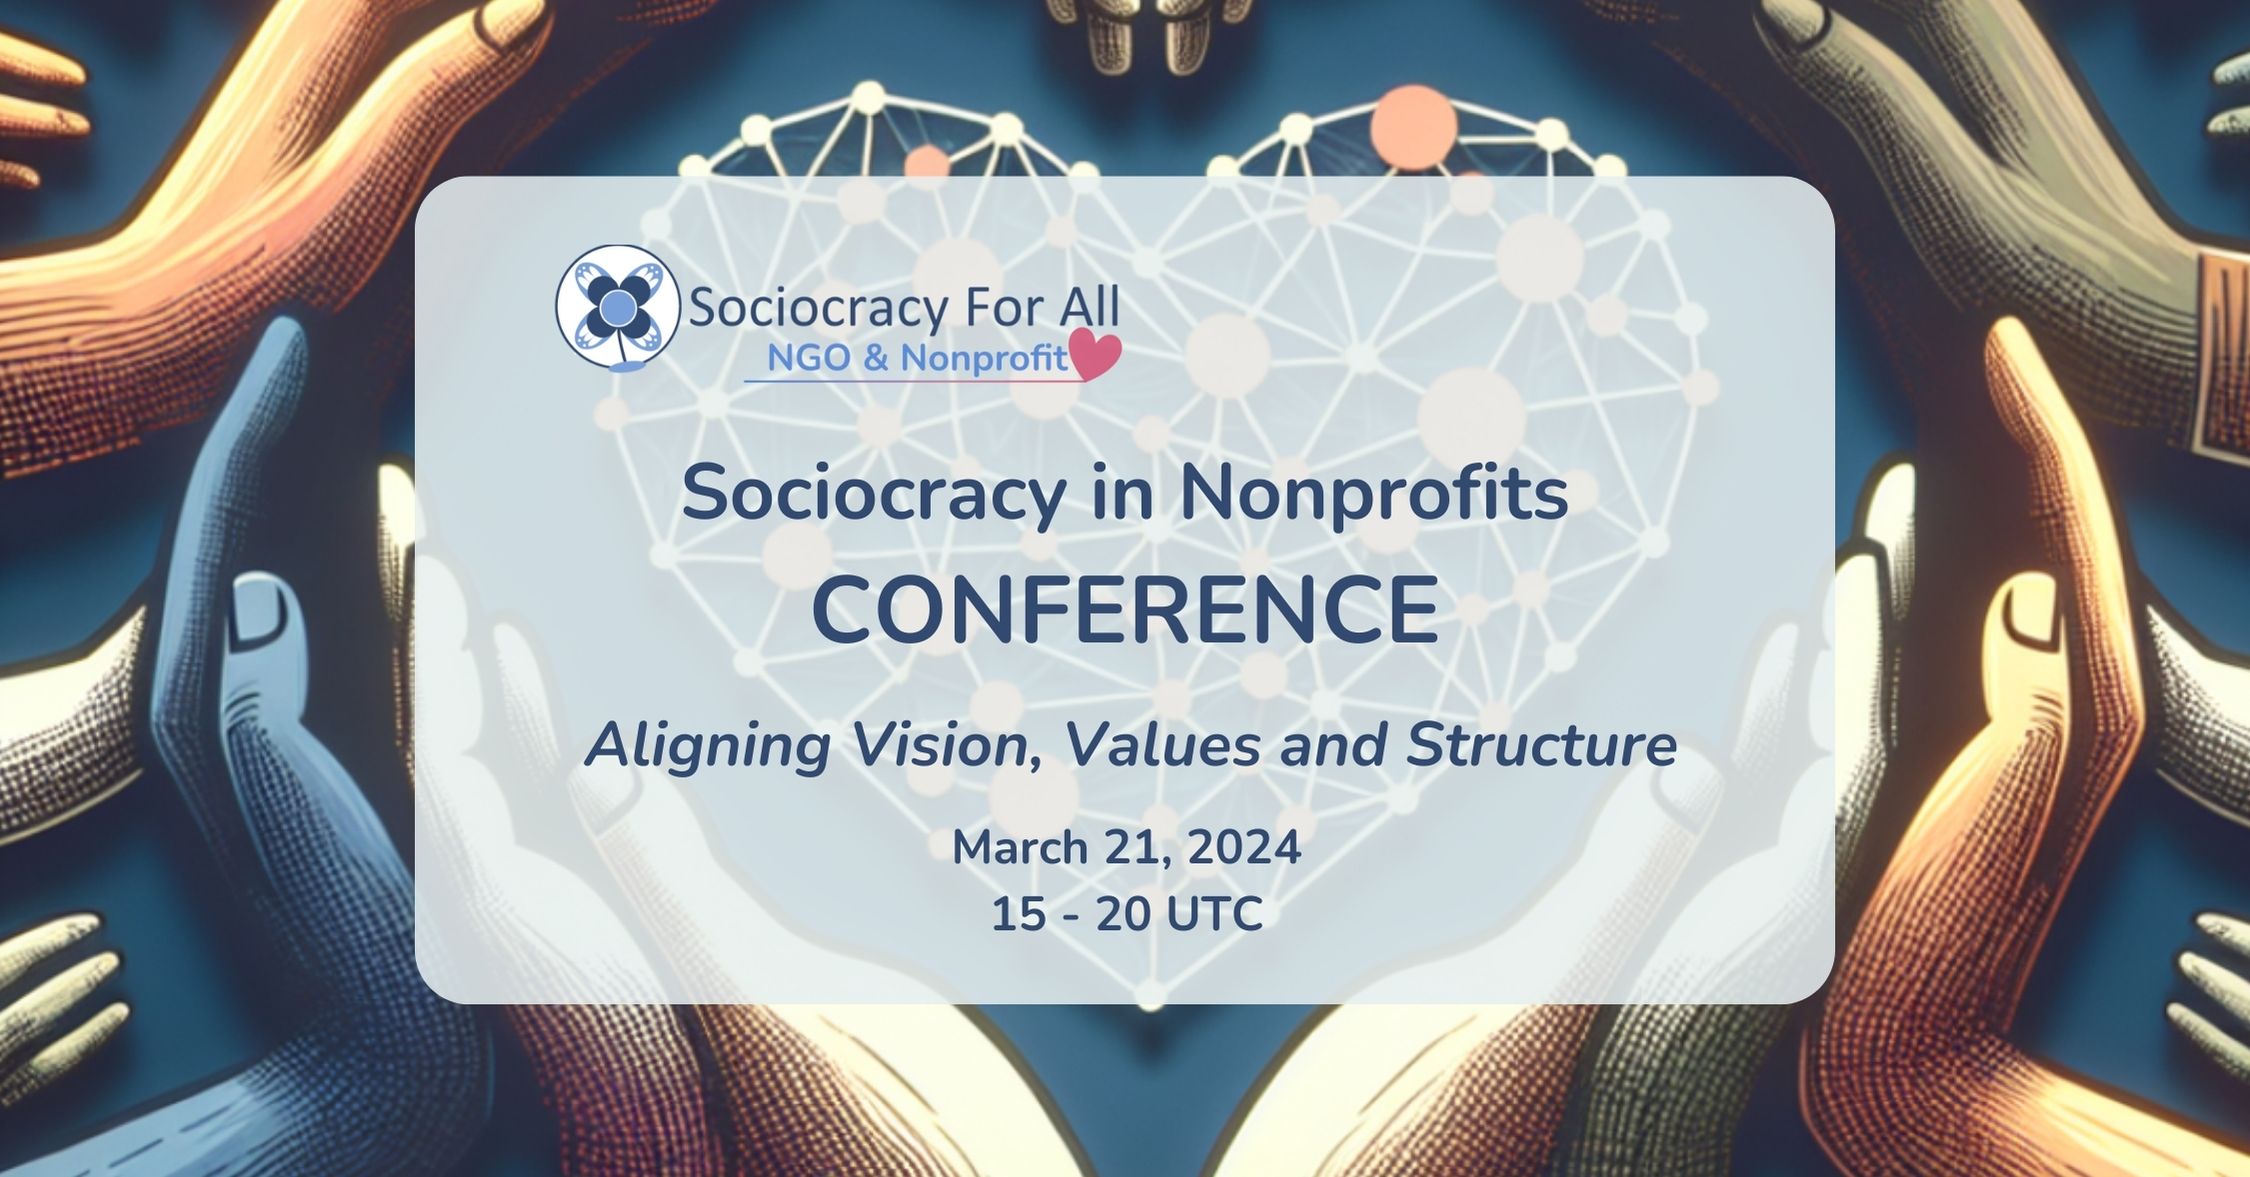 Sociocracy in Nonprofits Conference 2024